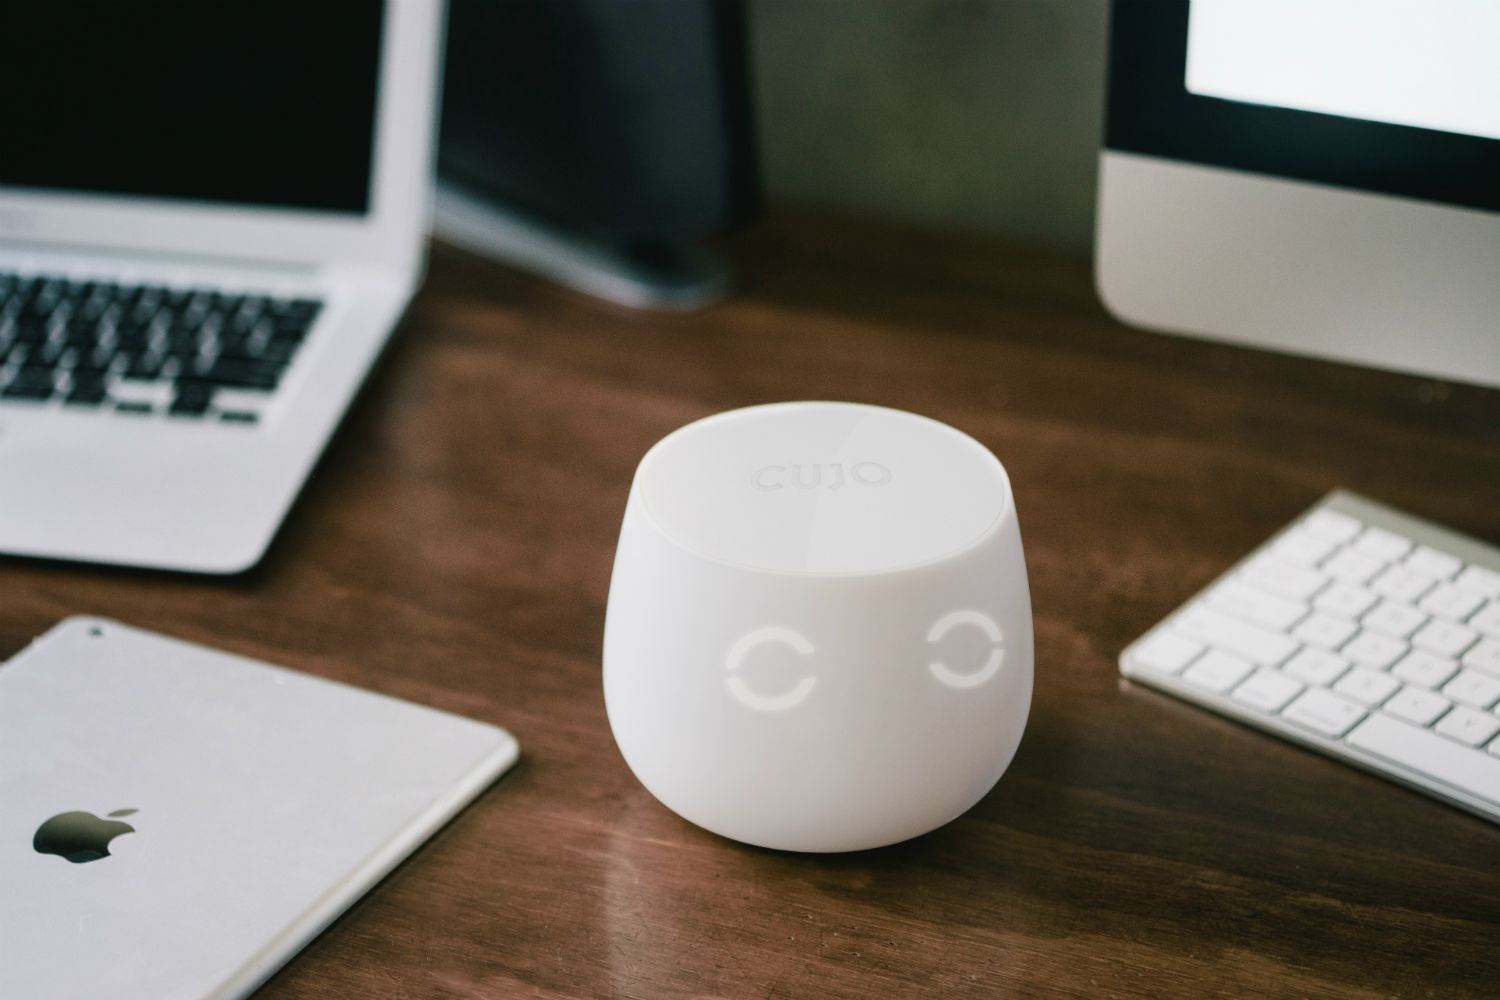 Cool new tech for parents: The Cujo hacking prevention device protects anything at all connected to your network, from phones and computers to baby monitors